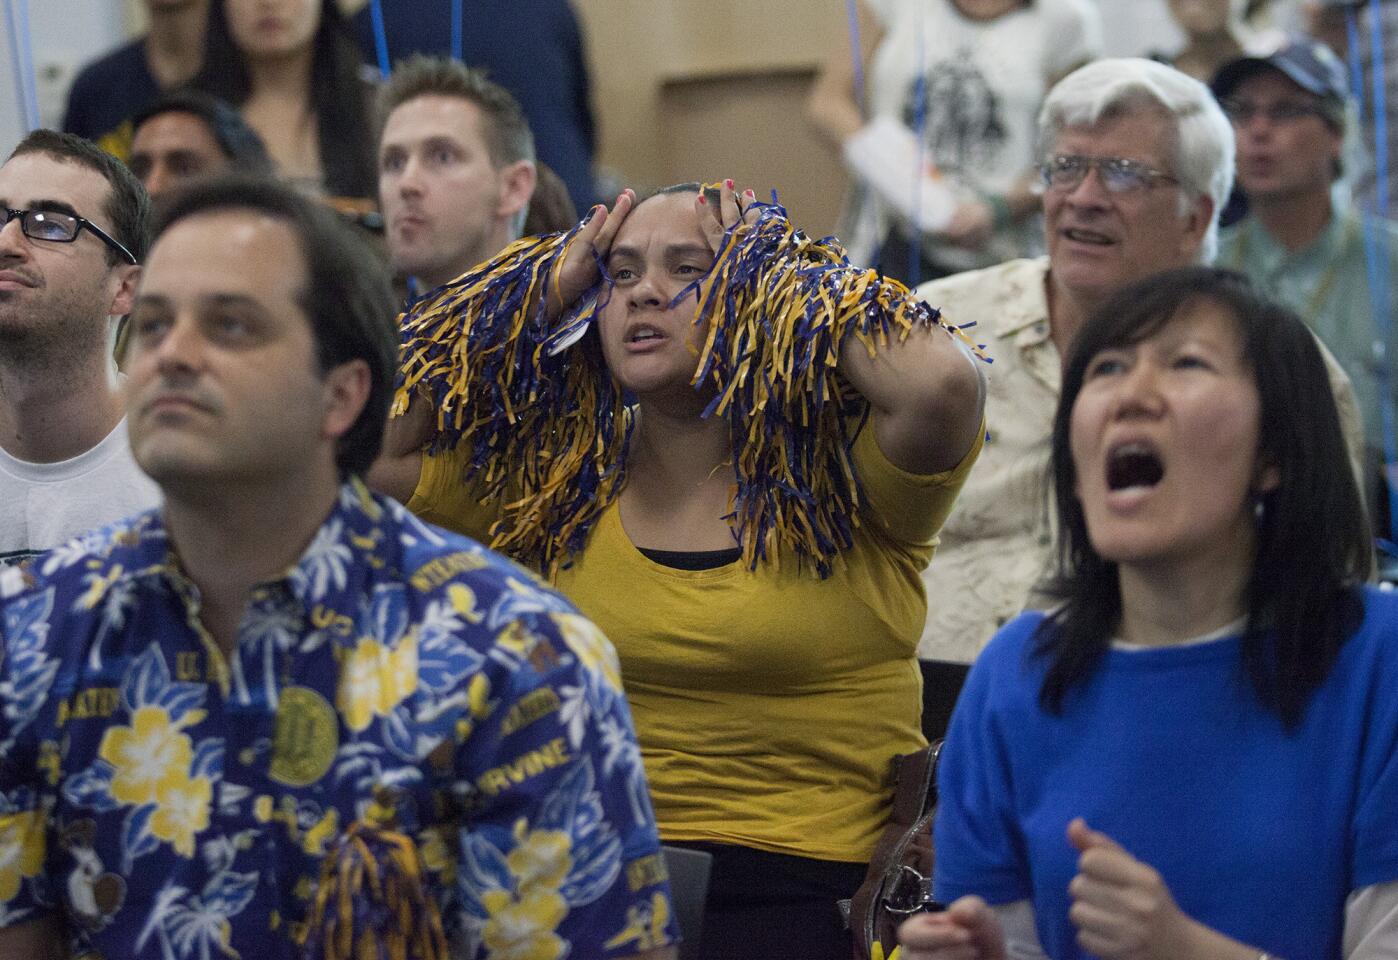 UC Irvine junior Dulce Corum, center, reacts to a play as the Anteaters take on the Louisville Cardinals in a mens' basketball NCAA tournament during a game-viewing party for fans at UC Irvine Newkirk Alumni Center on Friday. UC Irvine fell to Lousiville 57-55. (Kevin Chang/ Daily Pilot)